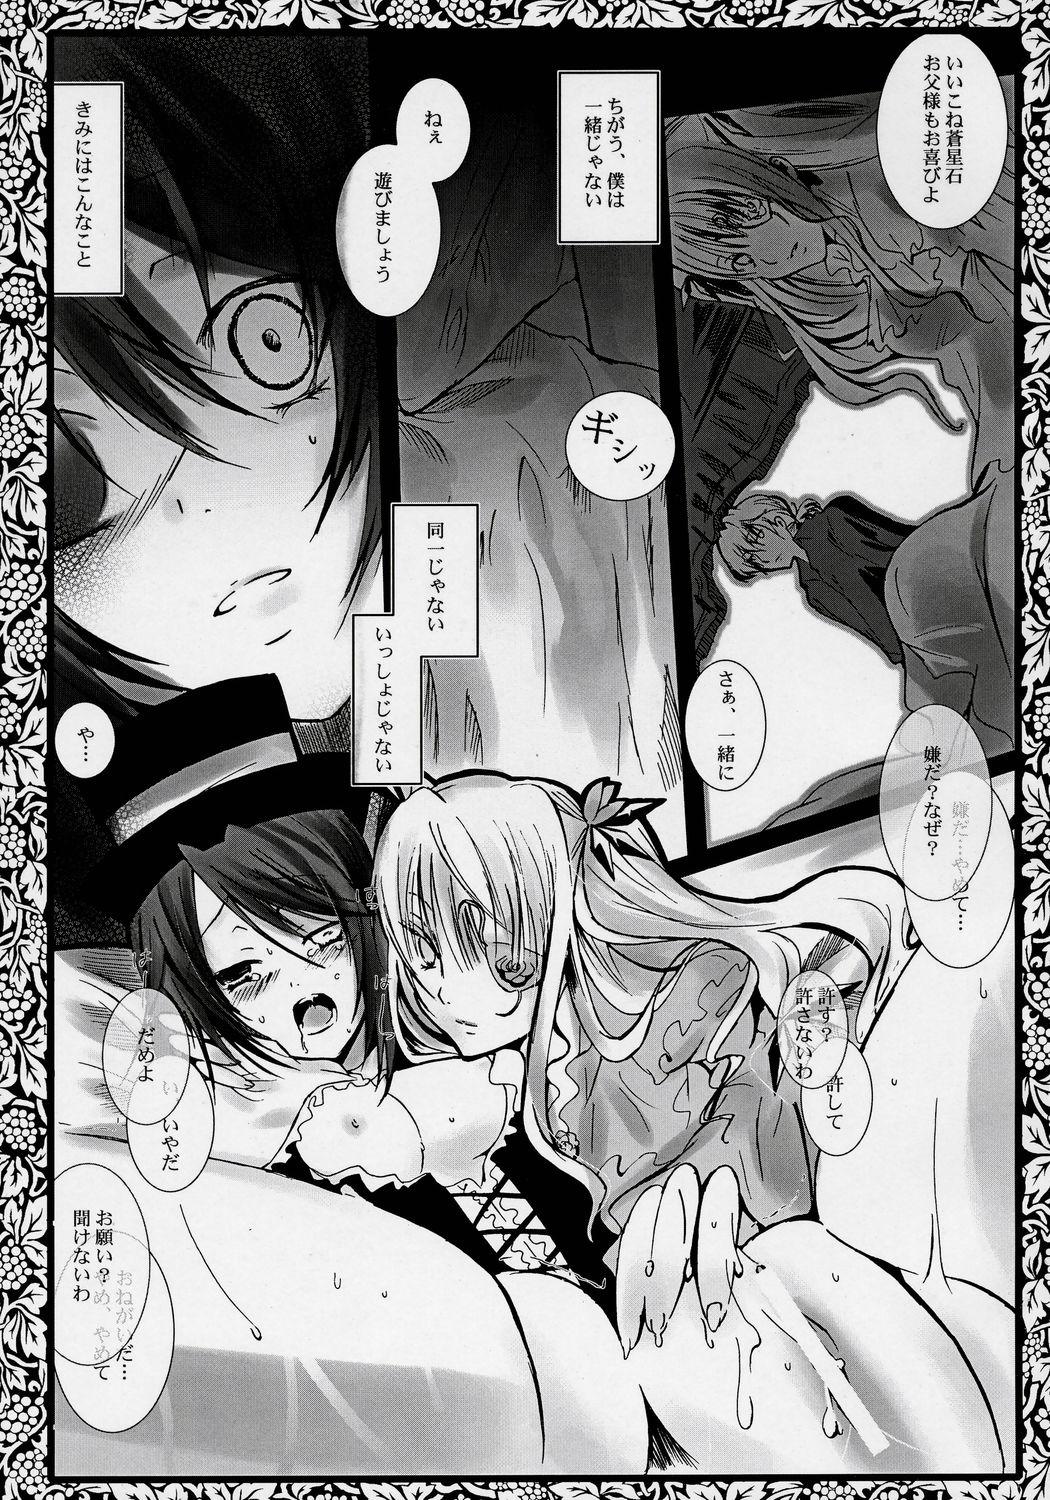 Couch Pupa Lapis - Rozen maiden Glamcore - Page 9